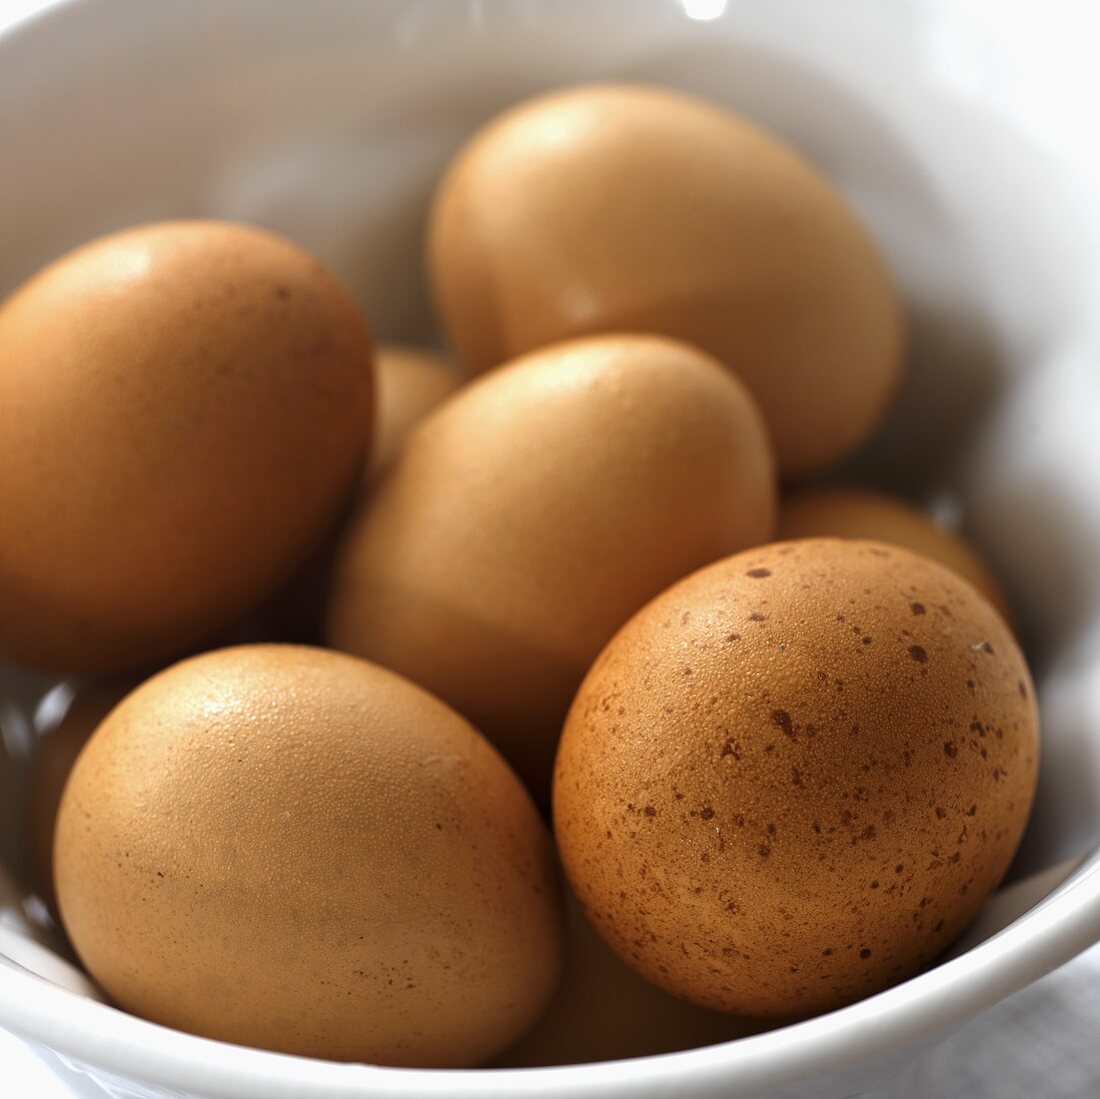 Fresh Brown Eggs from Iceberg Farms in New Jersey